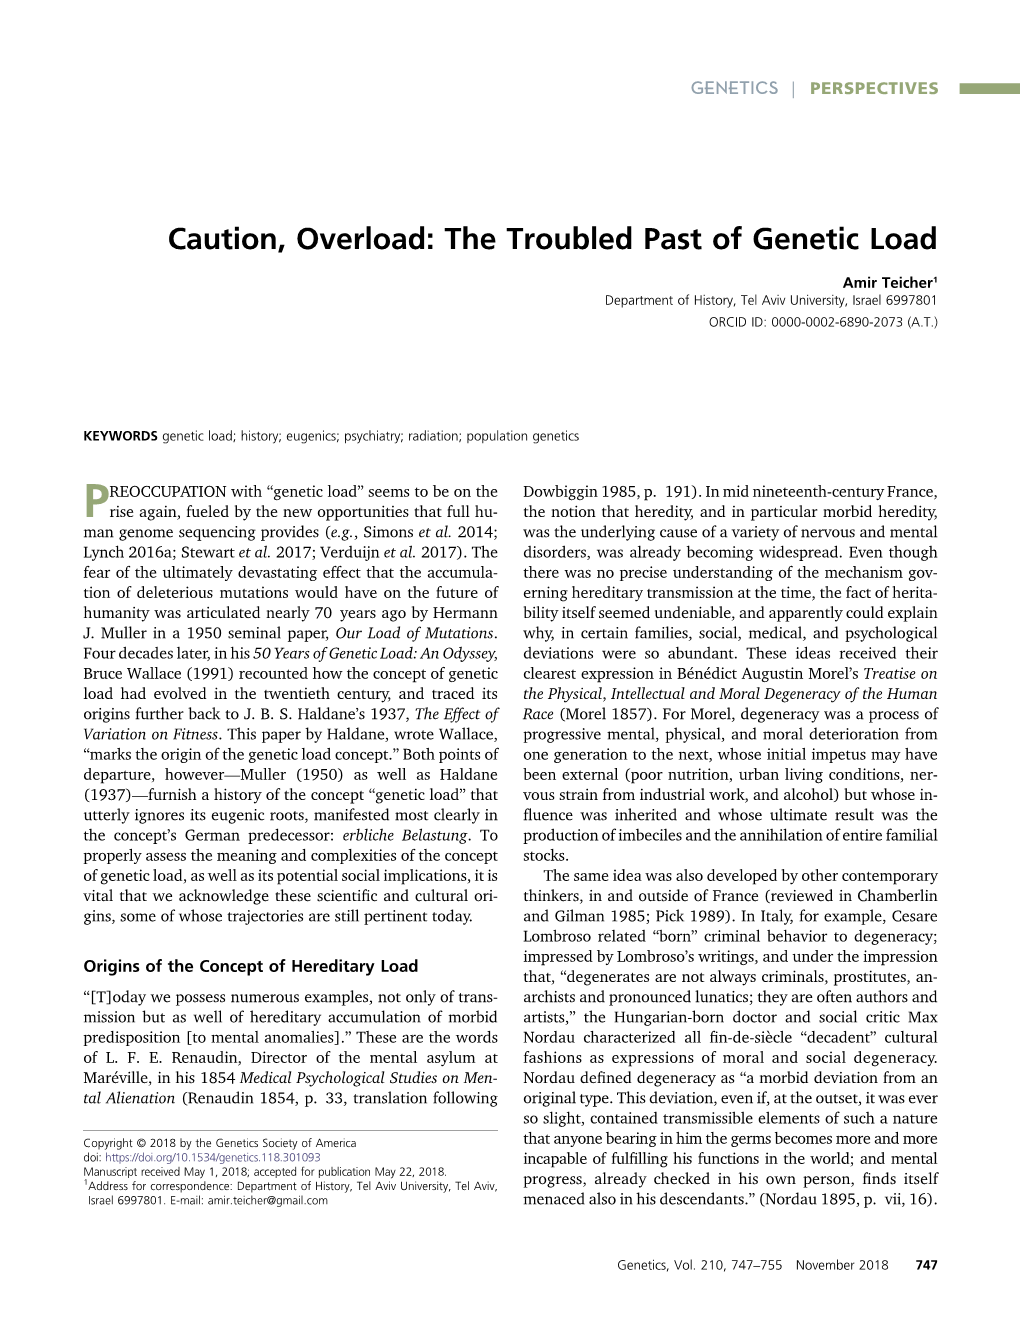 Caution, Overload: the Troubled Past of Genetic Load